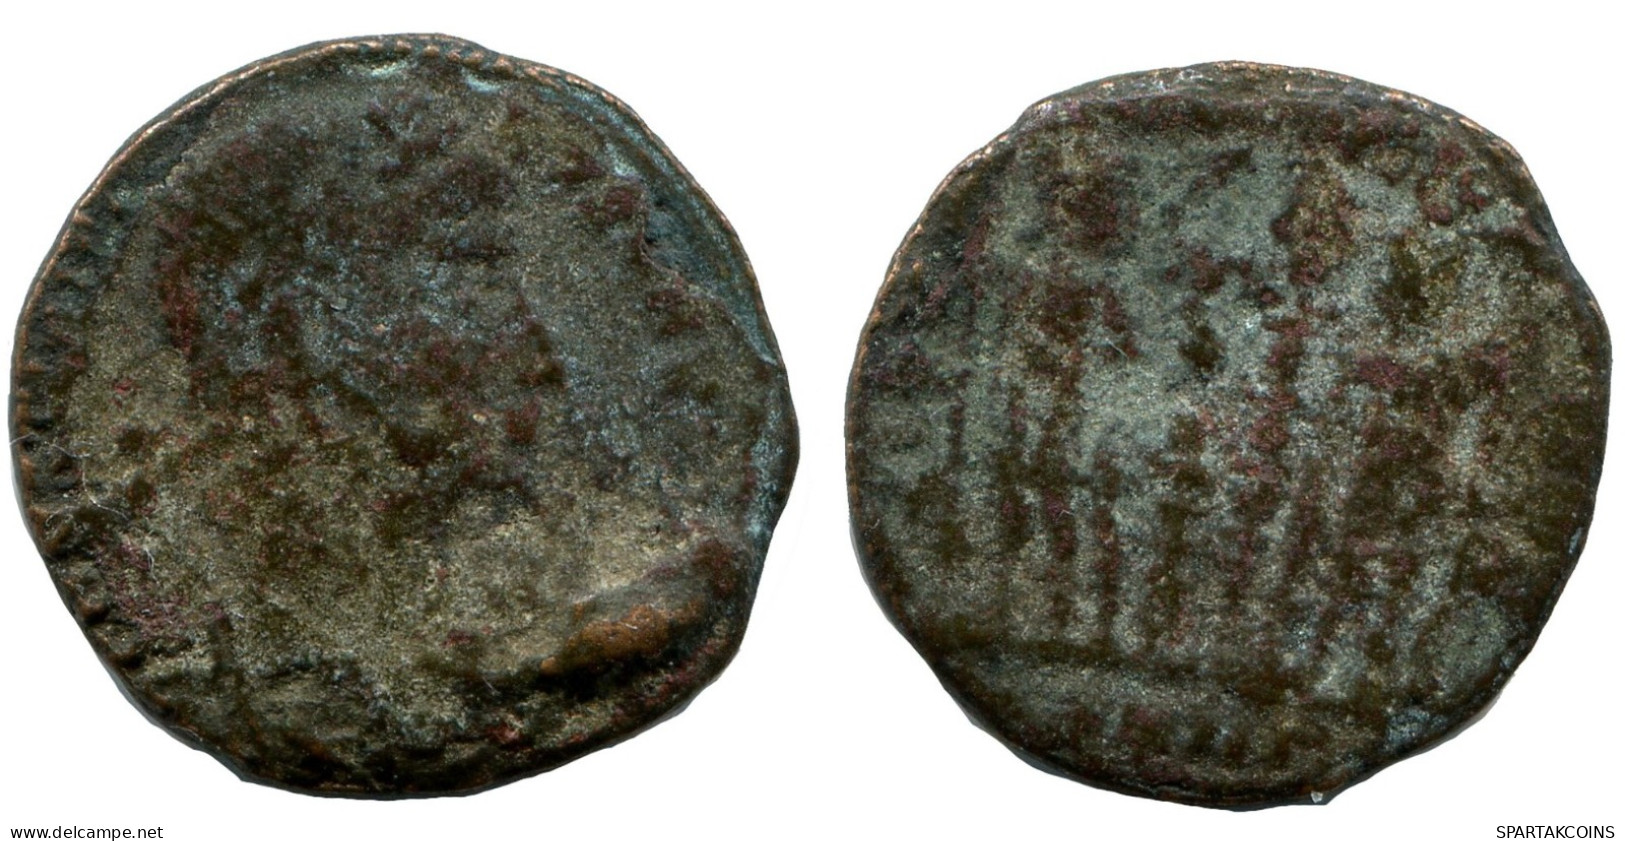 CONSTANTINE I MINTED IN NICOMEDIA FROM THE ROYAL ONTARIO MUSEUM #ANC10876.14.D.A - Der Christlischen Kaiser (307 / 363)